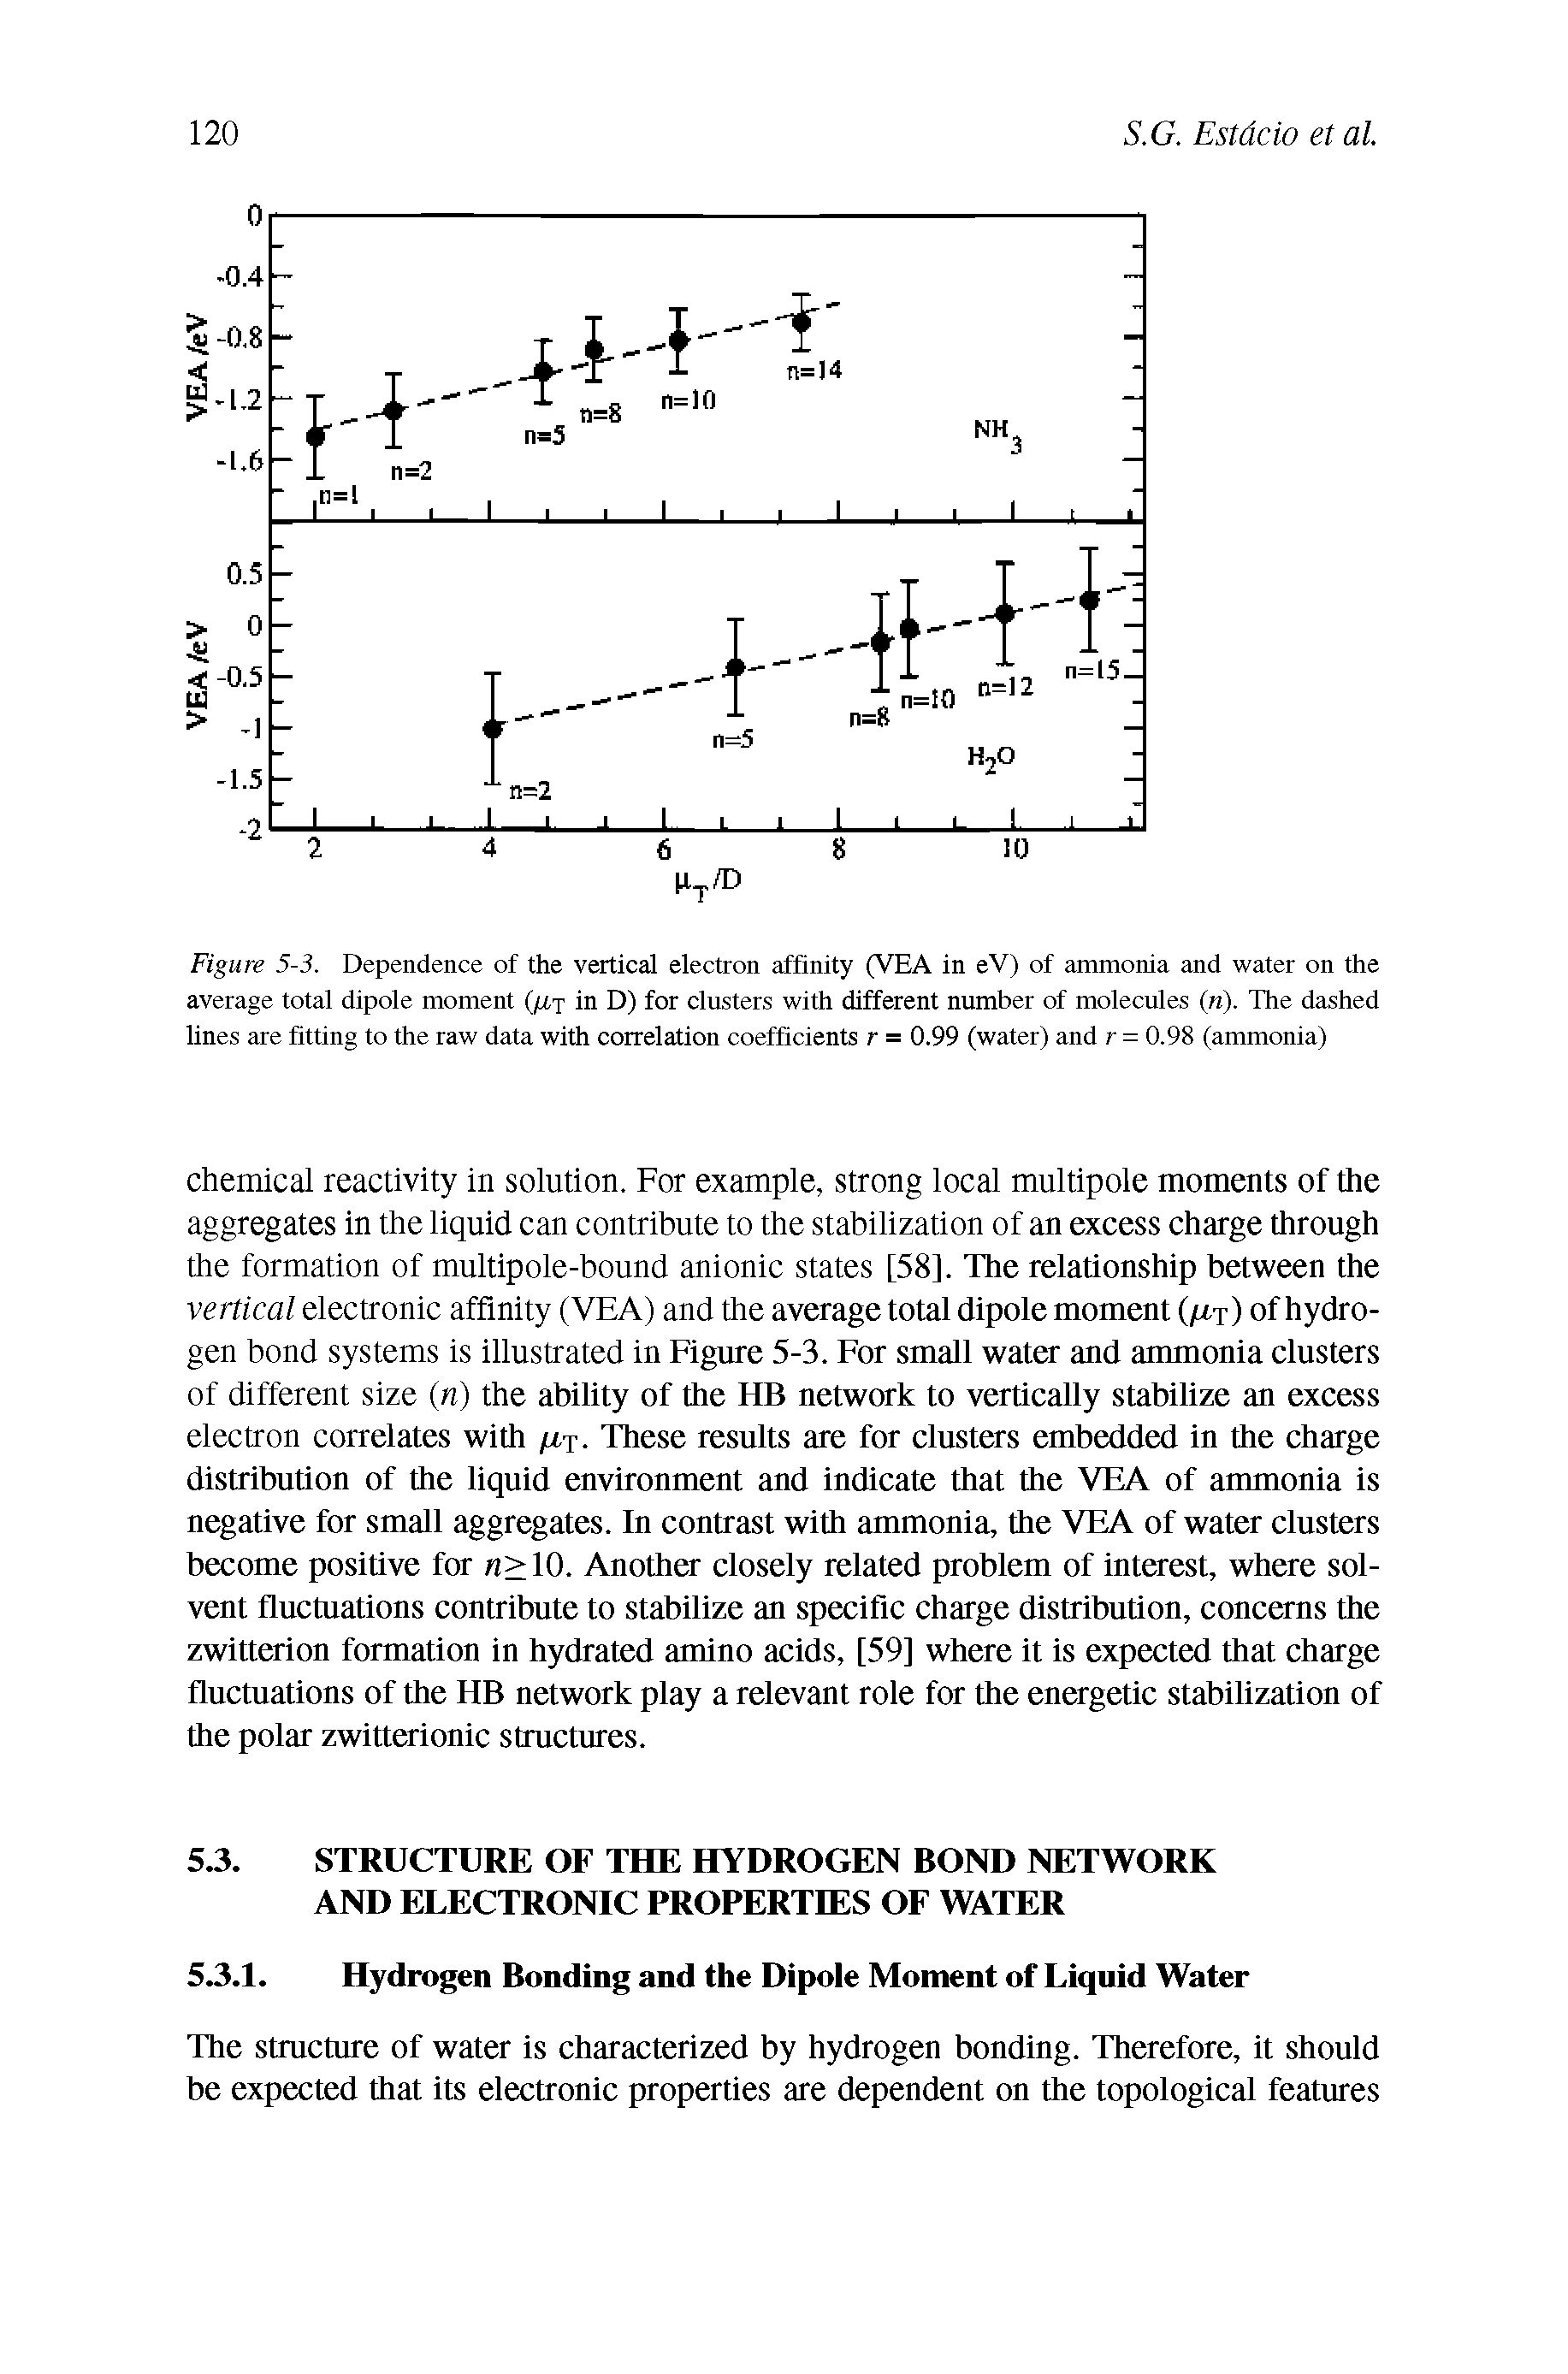 Figure 5-3. Dependence of the vertical electron affinity (VEA in eV) of ammonia and water on the average total dipole moment in D) for clusters with different number of molecules (n). The dashed lines are fitting to the raw data with correlation coefficients r = 0.99 (water) and r = 0.98 (ammonia)...